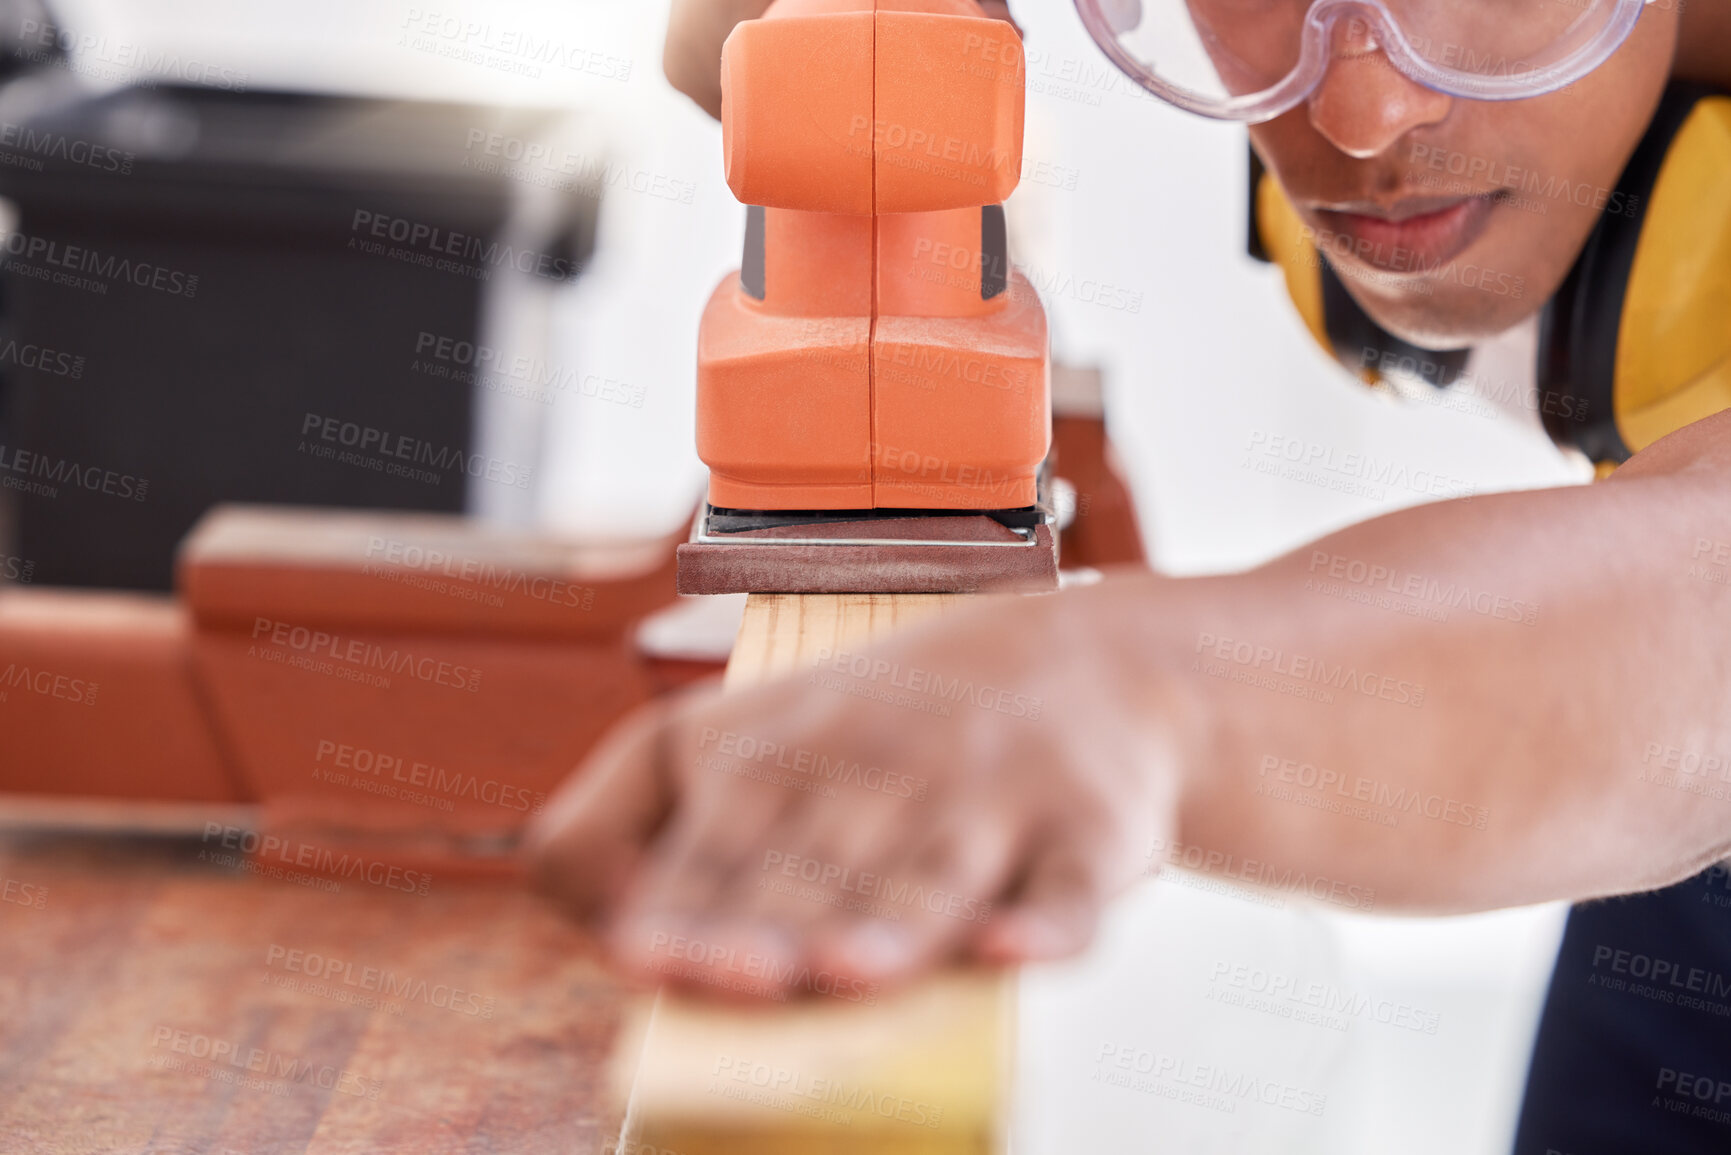 Buy stock photo Shot of a carpenter sanding a wood project